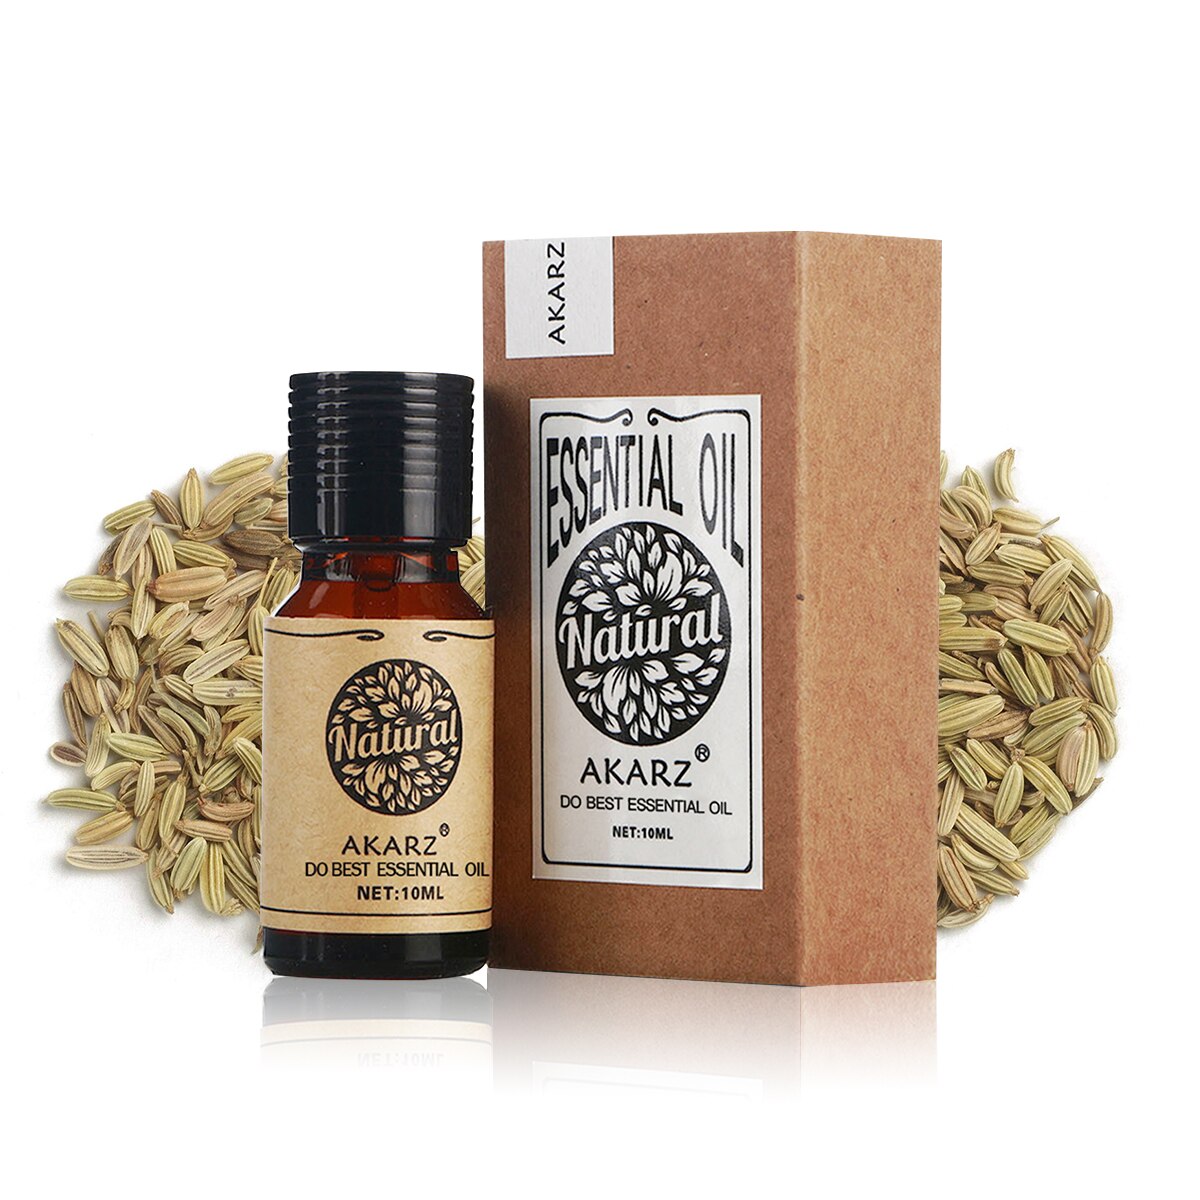 Fennel Essential Oil AKARZ Natural Aromatic for Aromatherapy Body Skin Care Aroma 10ml 30ml 100ml